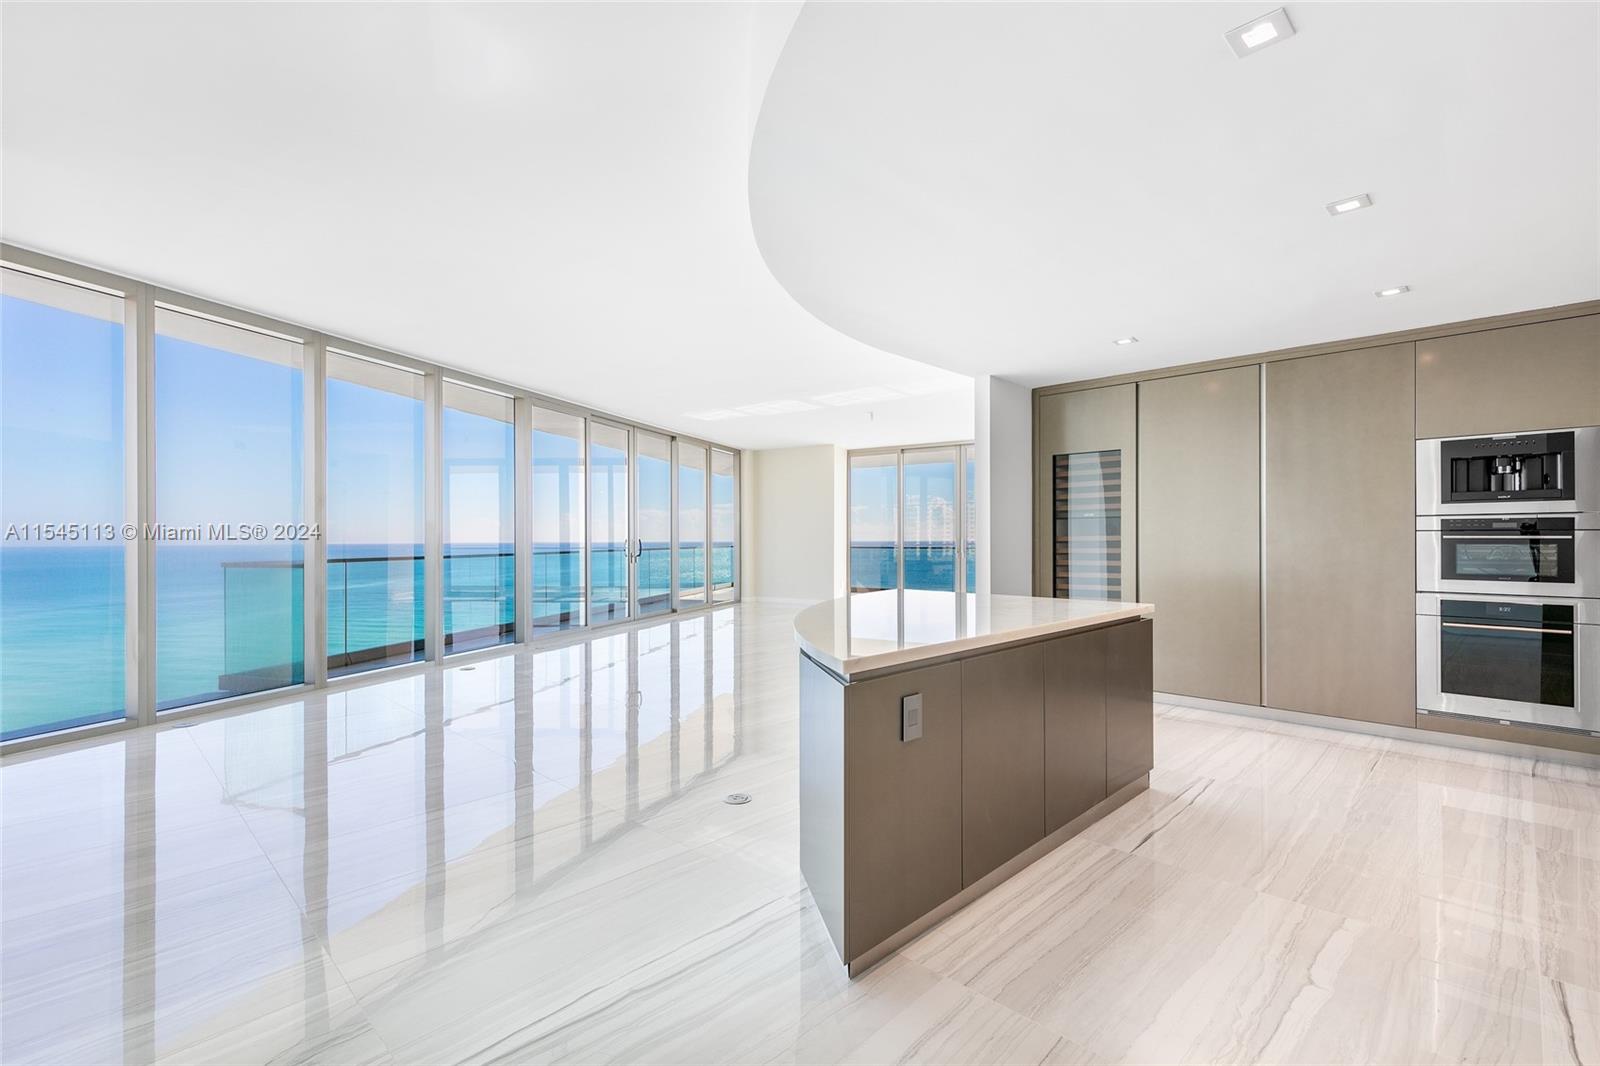 The only 00 line currently under $6 Million. The most in demand line in Residences by Armani Casa. Unit #700 is the northeast corner featuring 4bed/5.5 bath + service with incomparable views of the Atlantic Ocean. Featuring a private foyer and gracious living spaces, this home in the sky has modern & elegant features such as 10 ft. ceilings, 10 foot-deep balconies with summer kitchen, and a sleek European kitchen. Smart residence w/digital thermostat. Impeccable main suite with midnight bar, his & hers baths with breathtaking ocean view, and built out closet. Residents indulge in beach service, full service spa, & private restaurant.